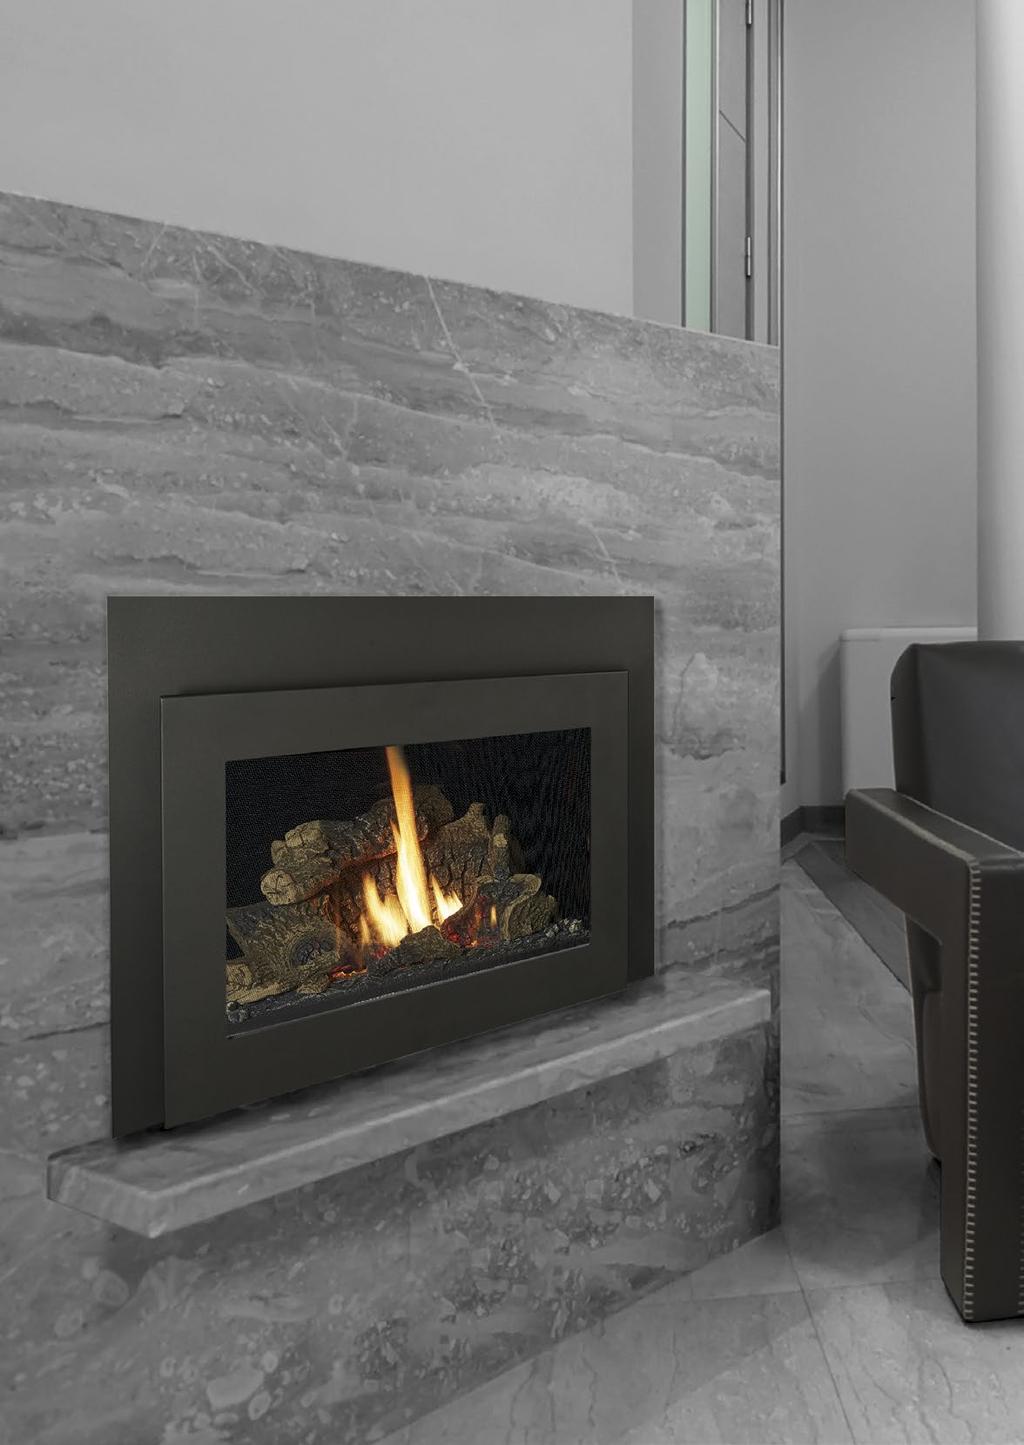 DVS GS2 Direct Vent Gas Fireplace Insert The Lopi DVS GS2 Direct Vent Small insert will turn your inefficient fireplace into a convenient source of gas heat.